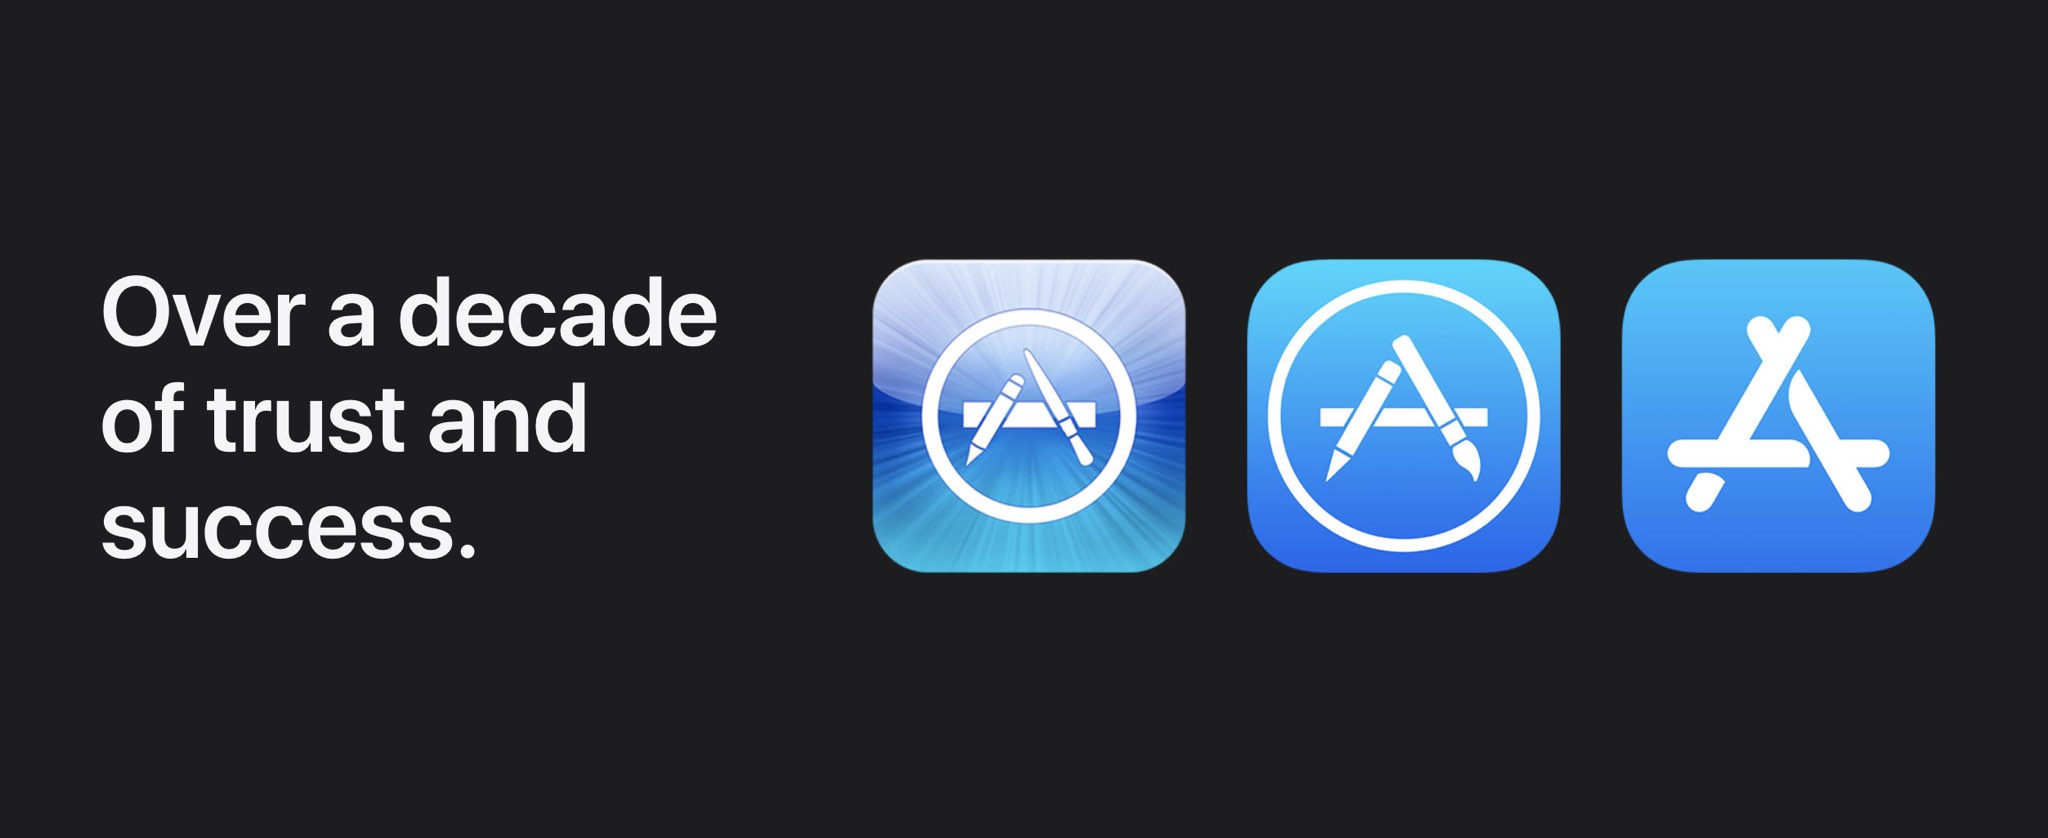 App Store banner with the tagline "Over a decade of trust and success"